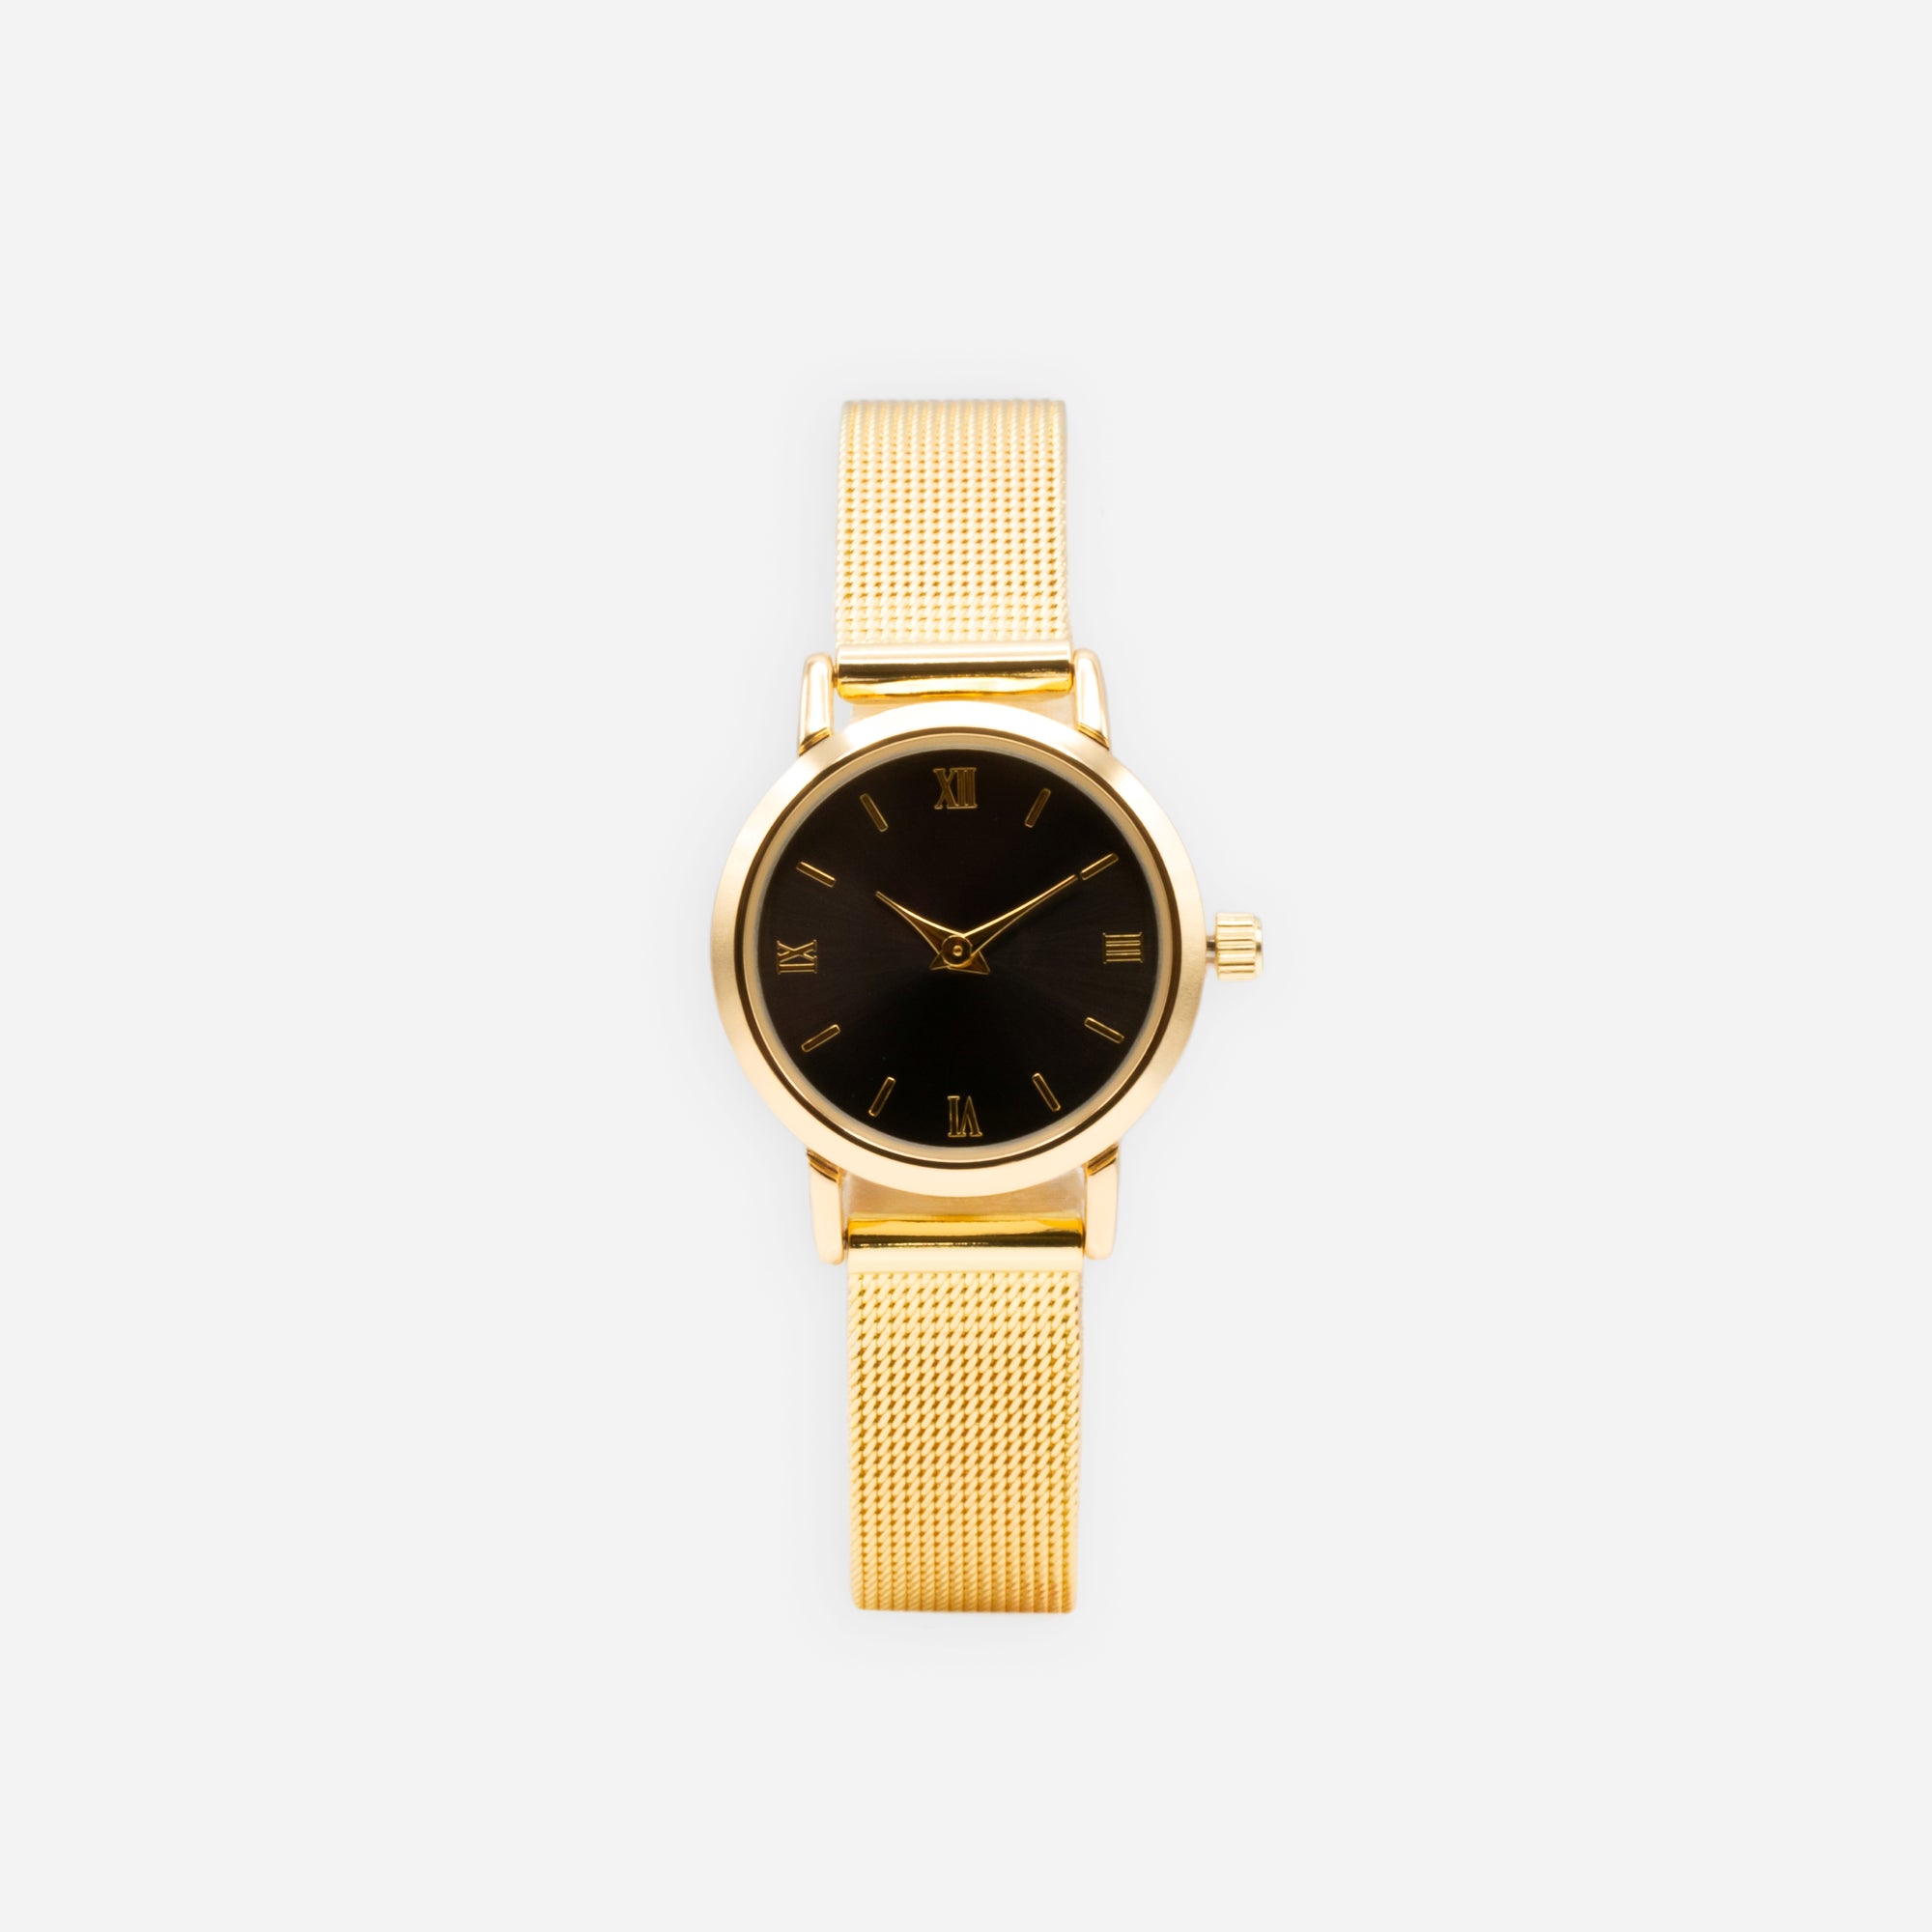 Gold watch with round black dial